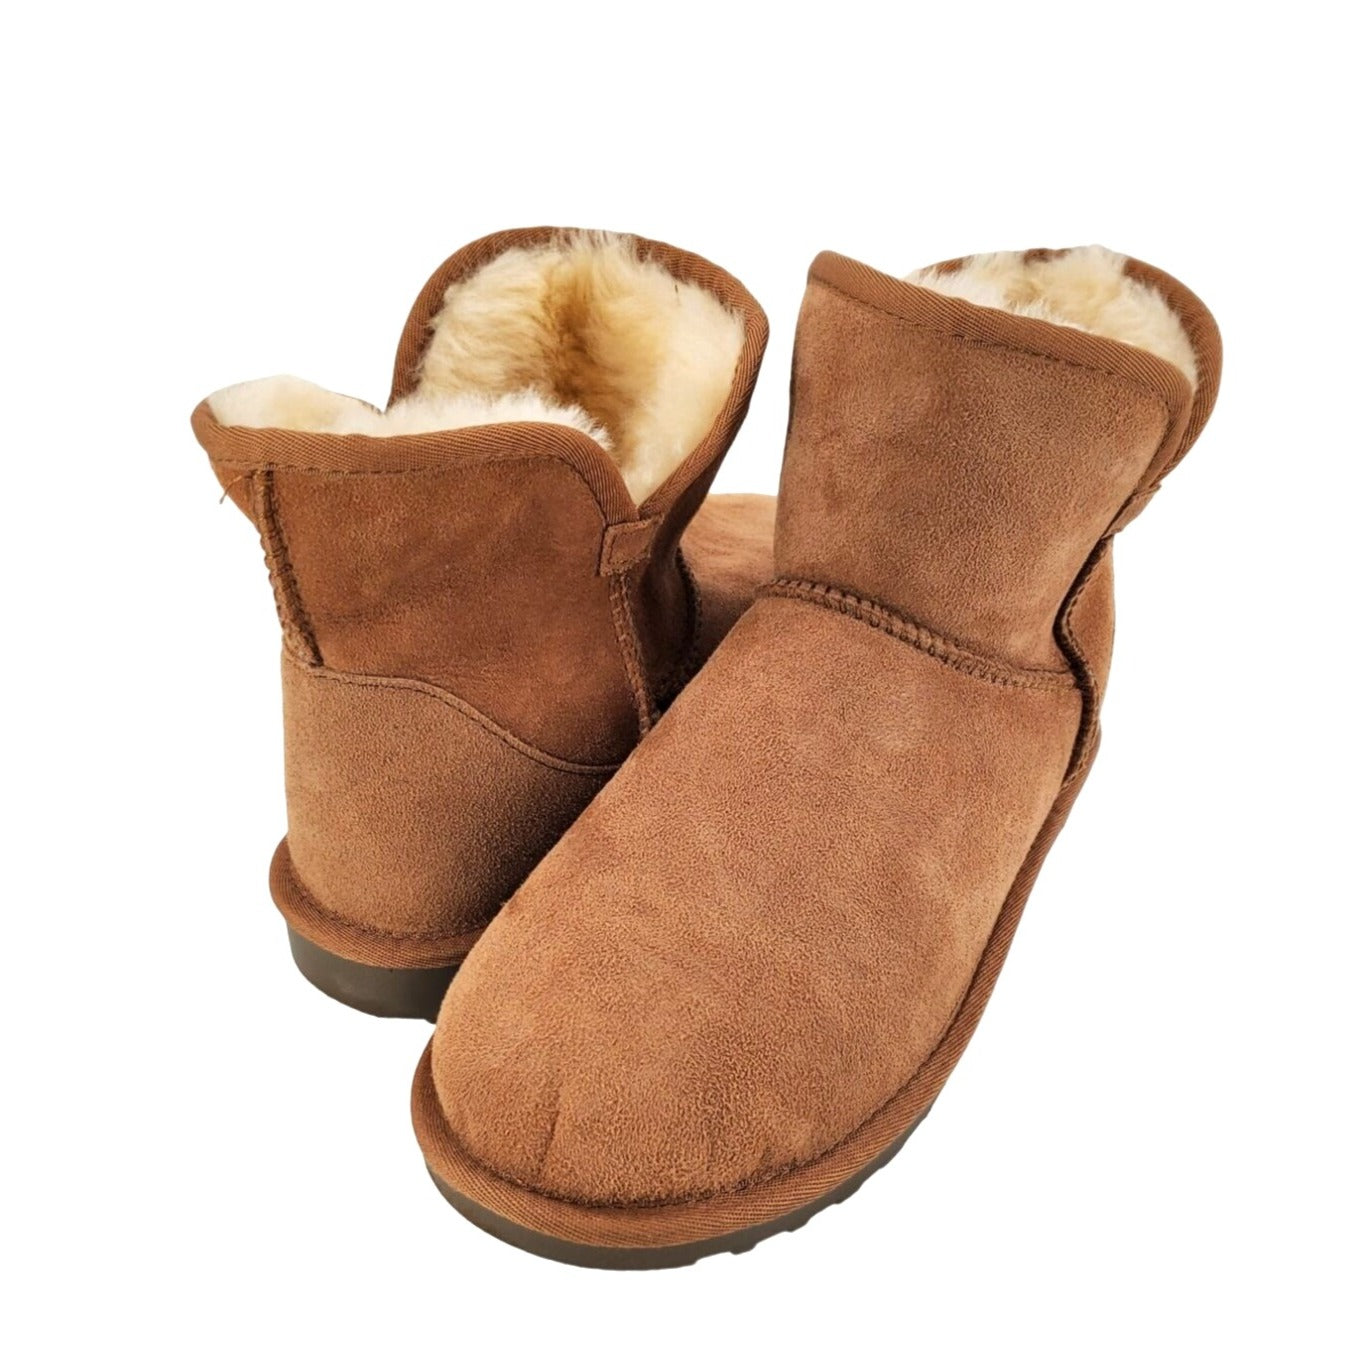 Kirkland Signature Real Fur Boot Womens SHEARLING Sheepskin Suede Scalloped Fold Over shoes